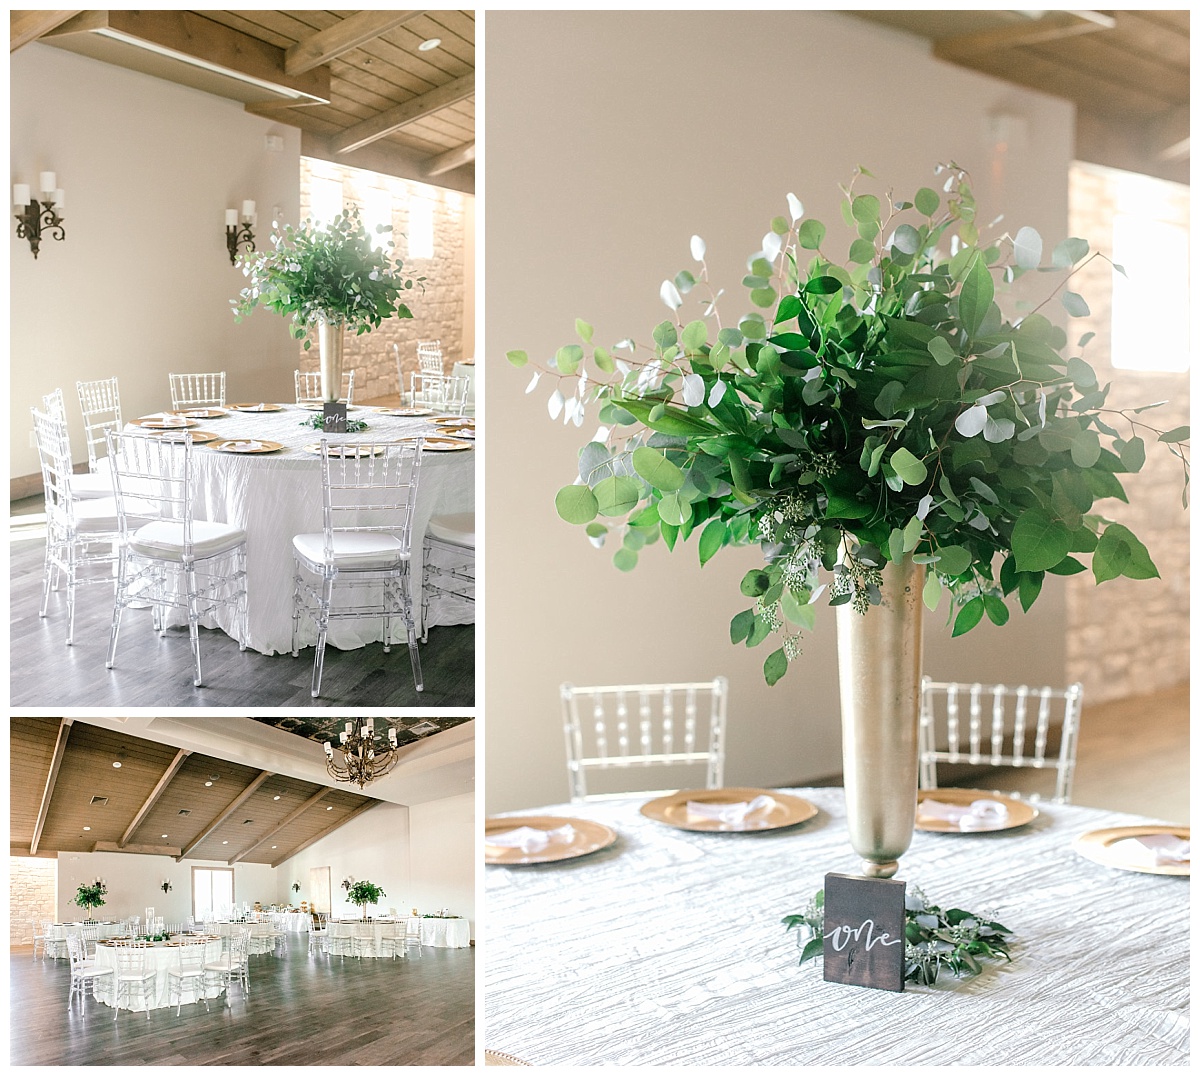 Hidden Pines,Highland Village,Dallas,greenery,Bethany Erin,Natural,Texas,Wedding,flowers,bouquets,centerpieces,A & L Floral Design,Smilax,Mantle